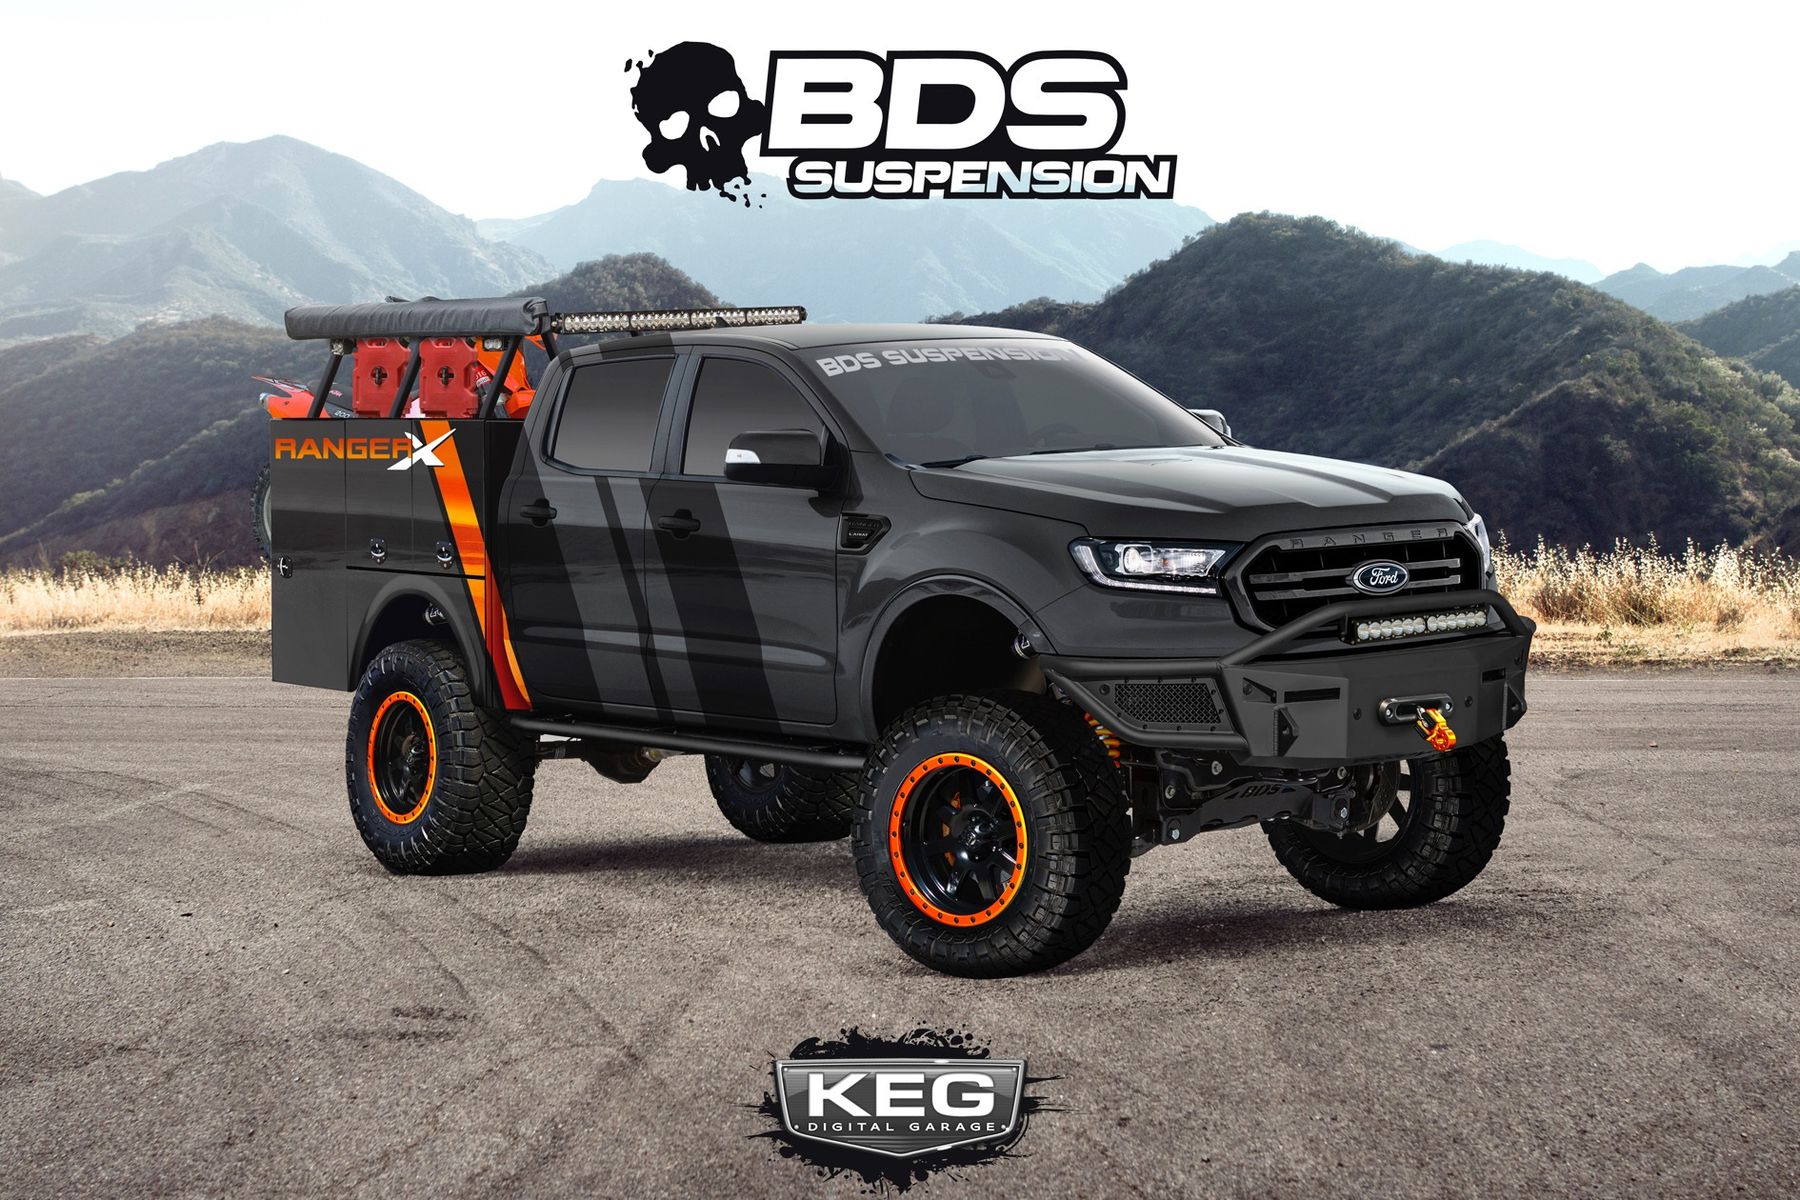 2019 Ford Ranger Xlt 4x4 Supercrew By Bds Suspension